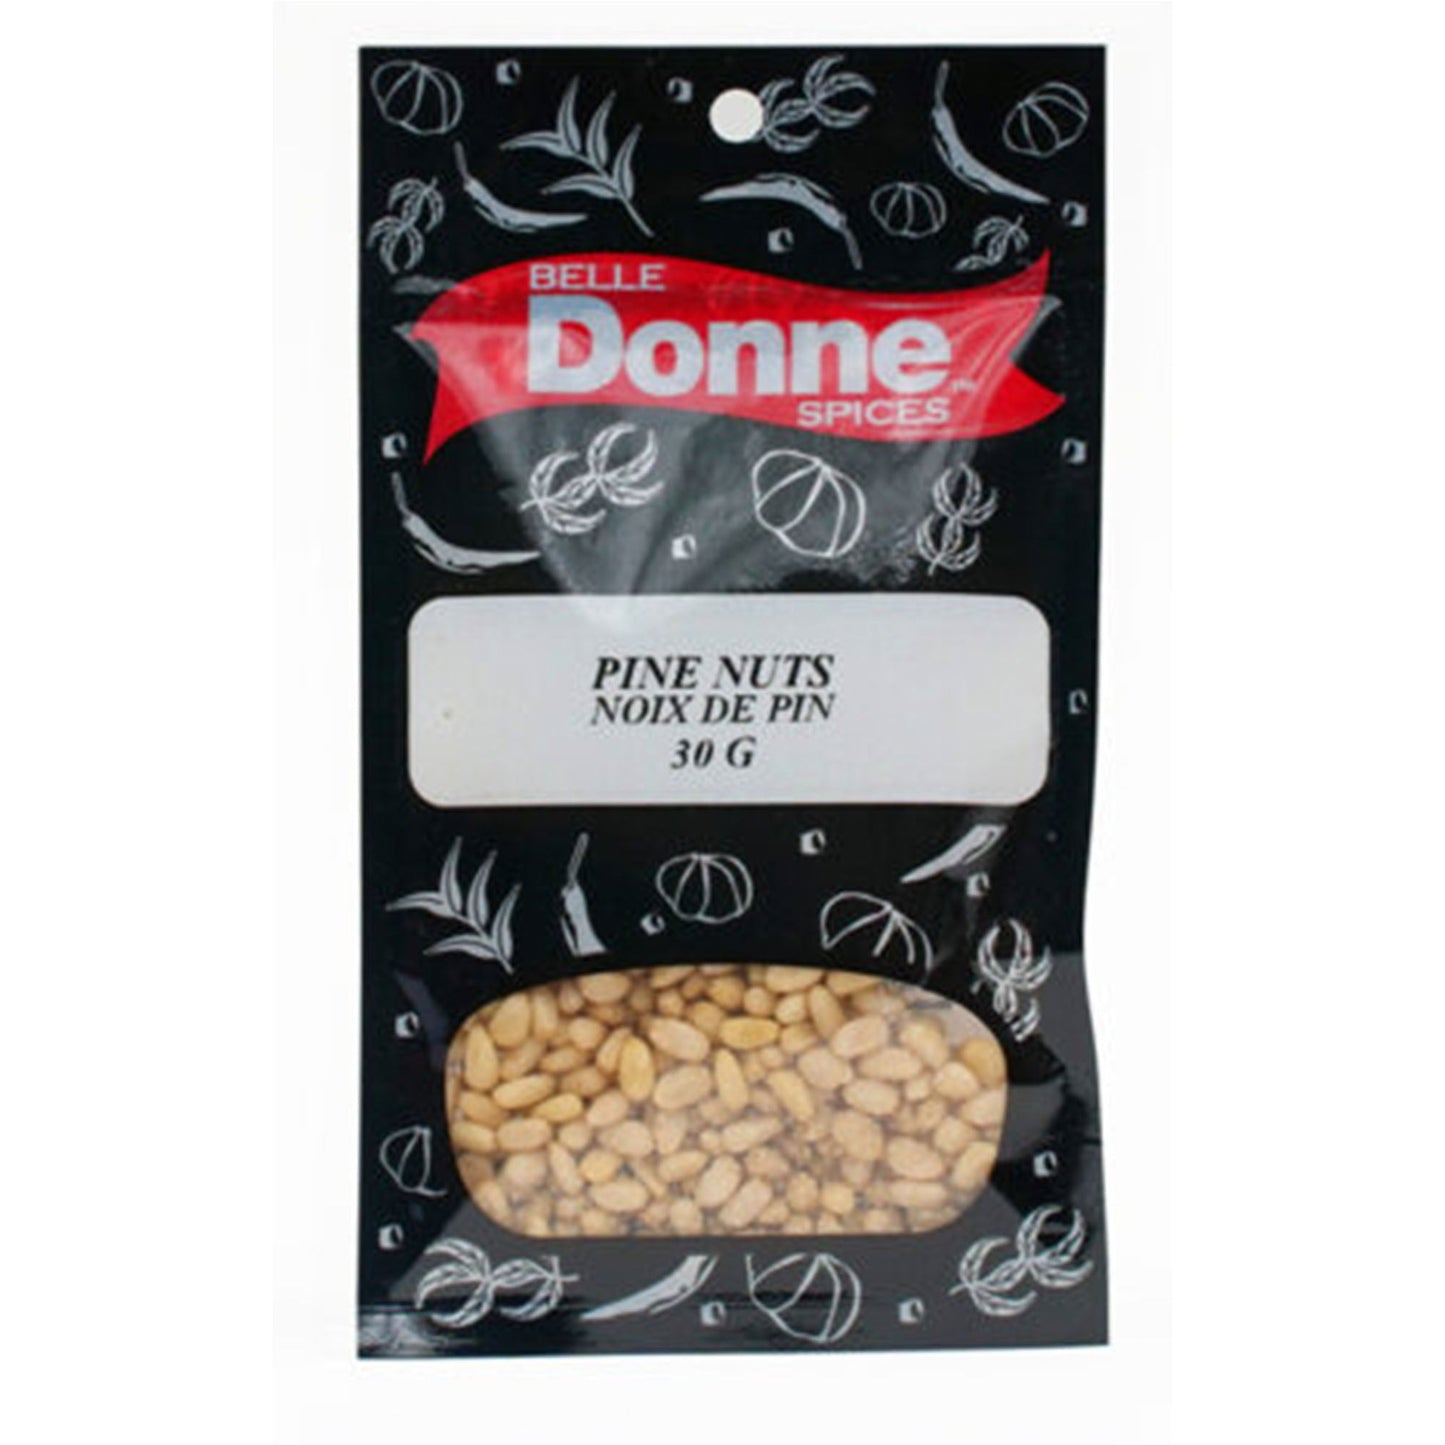 Donne Pine Nuts 30G